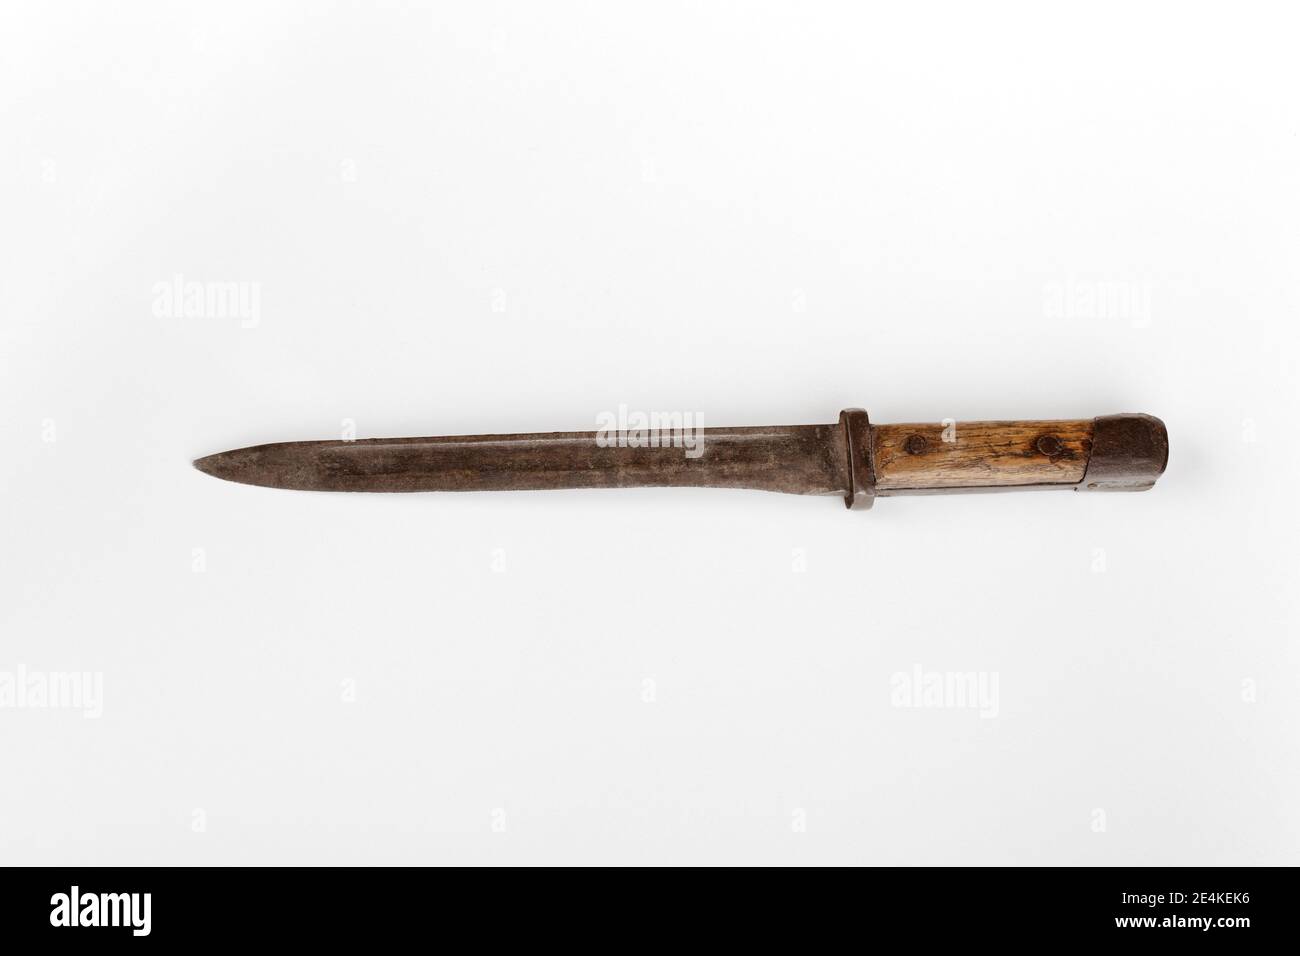 Old military bayonet weapon  isolated on white background Stock Photo